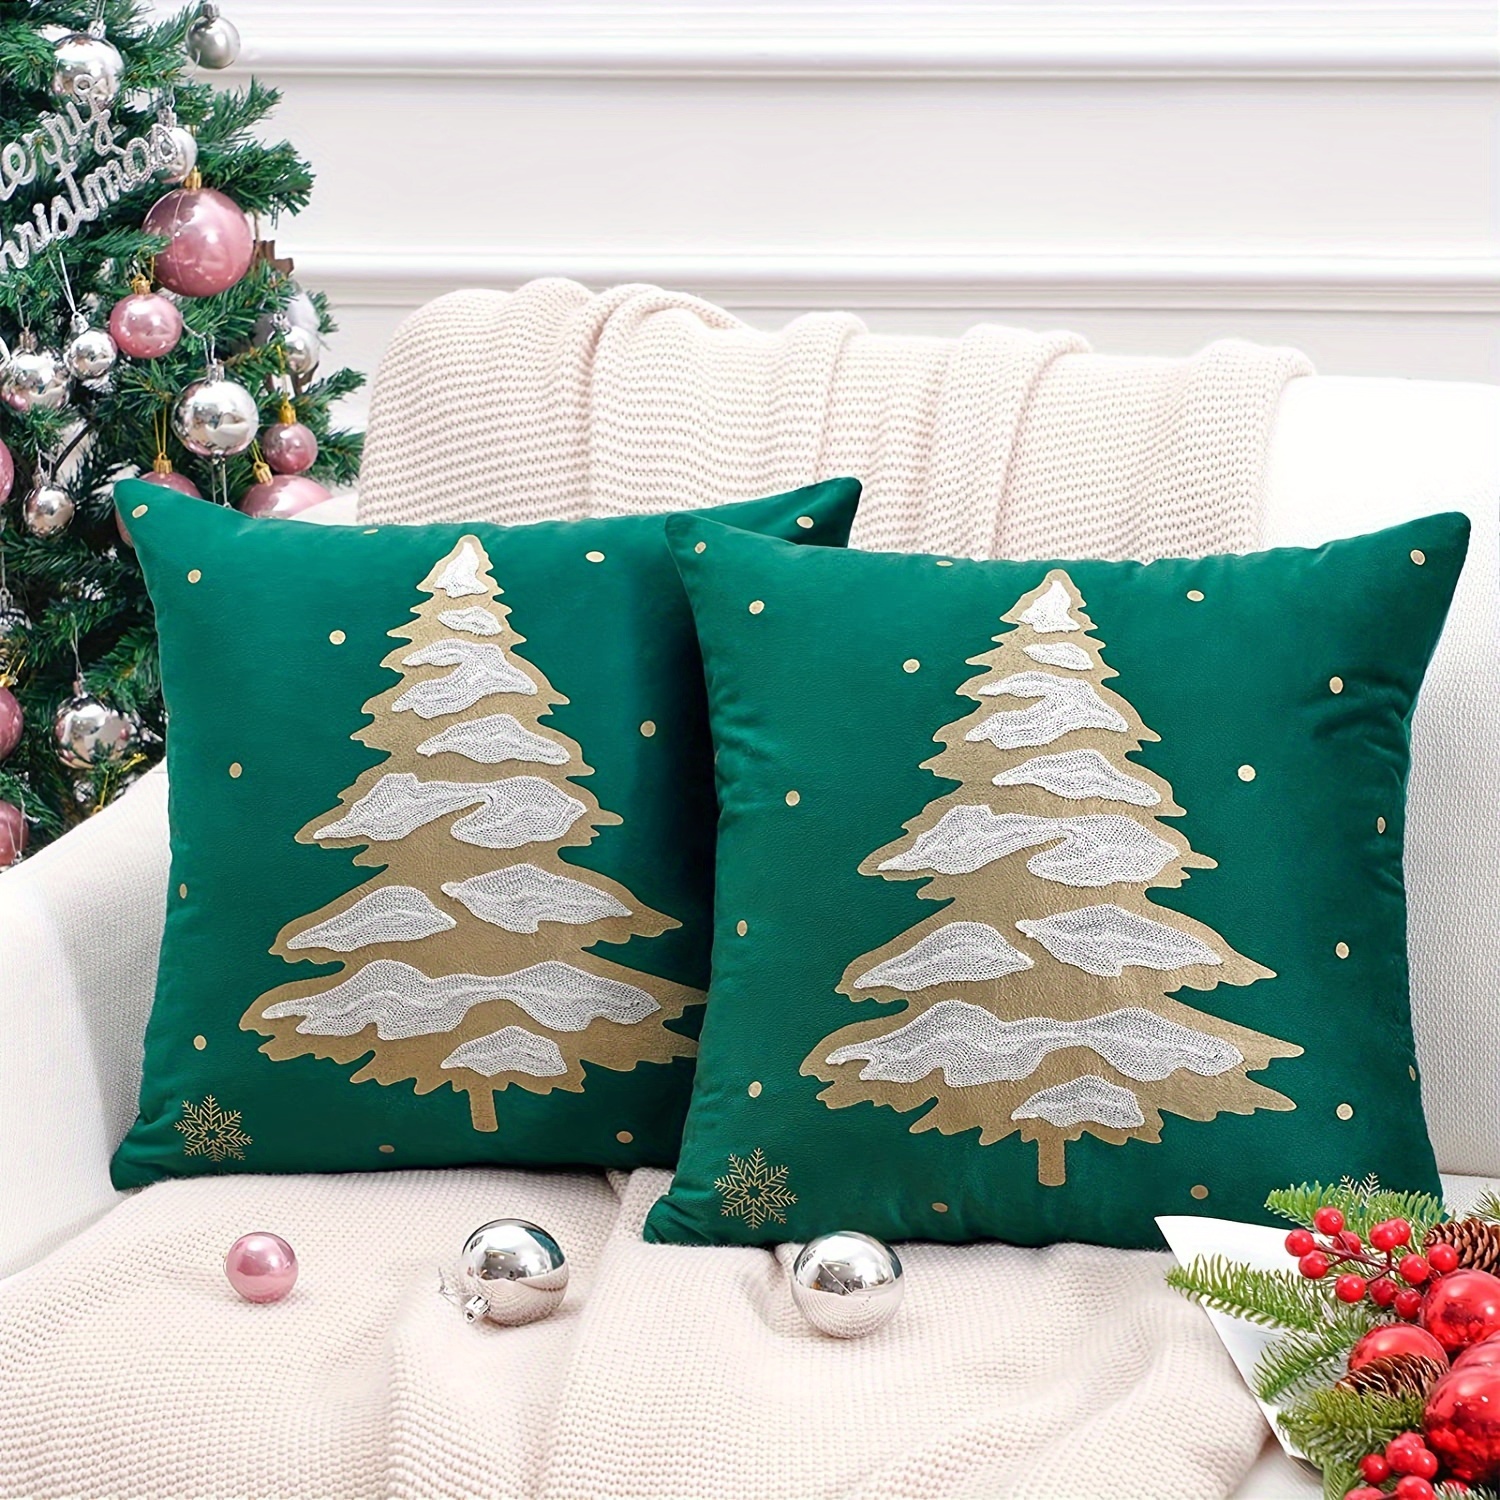 4pcs/set Christmas Pillow Covers 17.7inch*17.7inch, Christmas Deer Forest  Snowflake Bear Blue Christmas Pillow Covers For Sofa Bed Car Decor Winter  Holiday Farmhouse Decoration, Outdoor/indoor Use, Pillow Inserts Not  Included